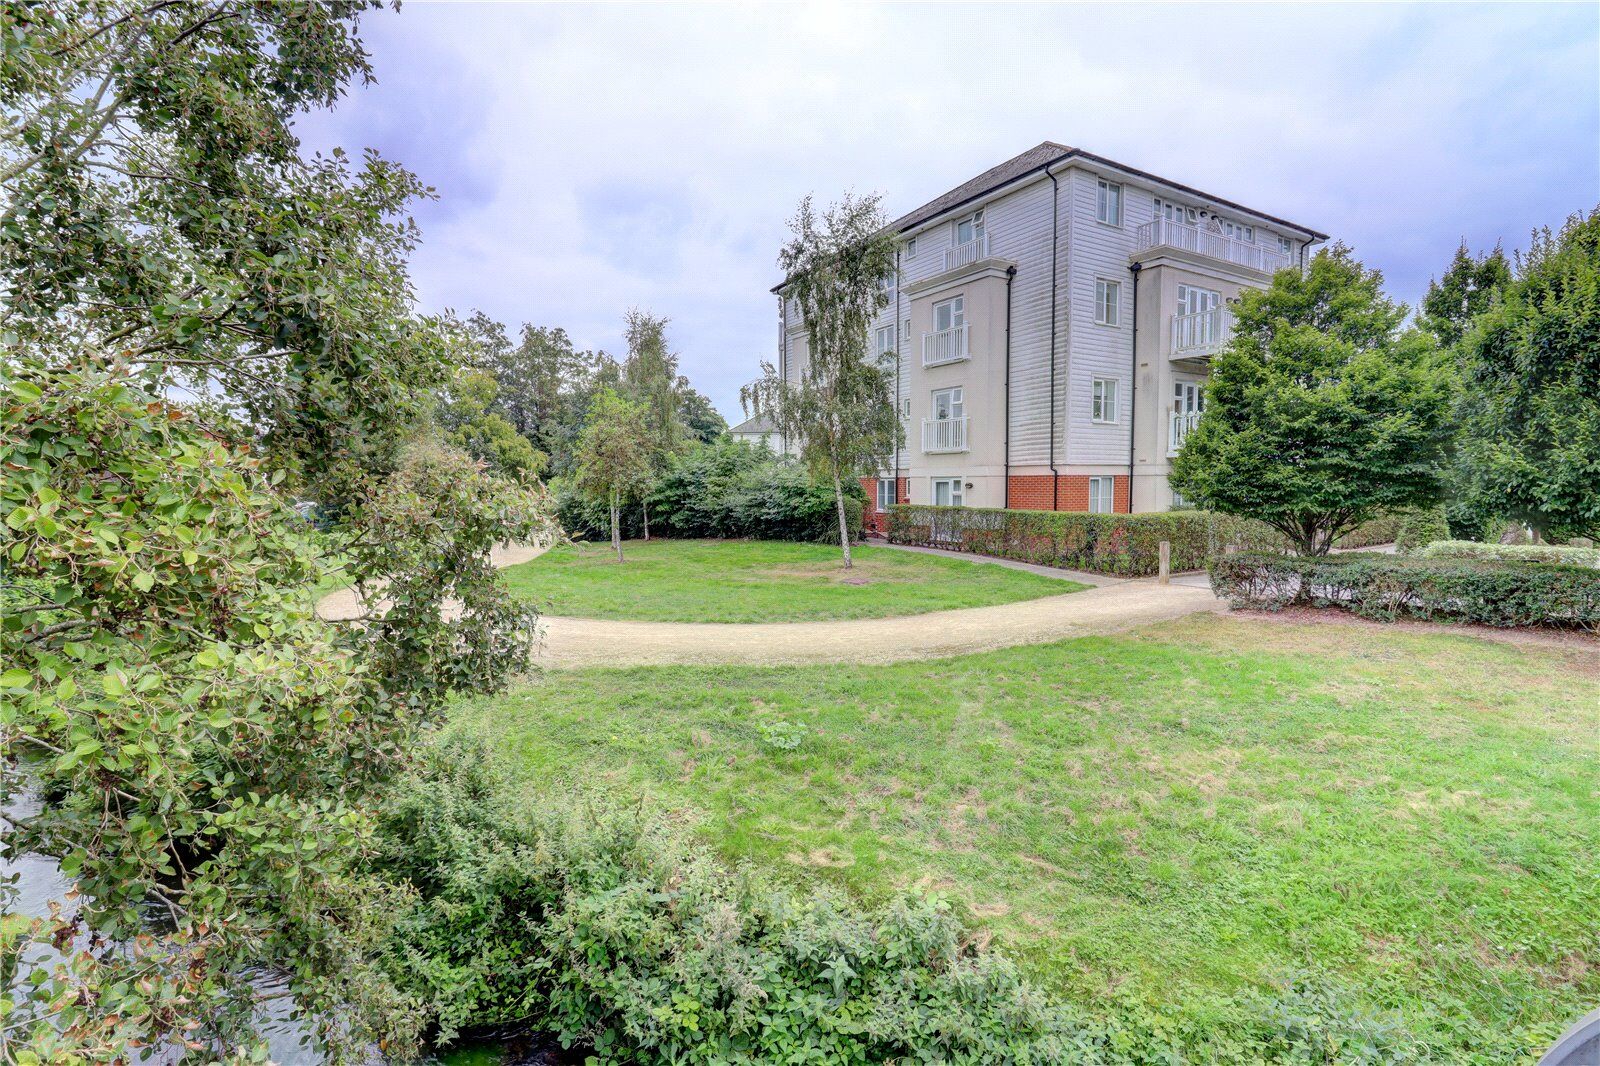 2 bedroom  flat for sale York House, Chequers Avenue, HP11, main image